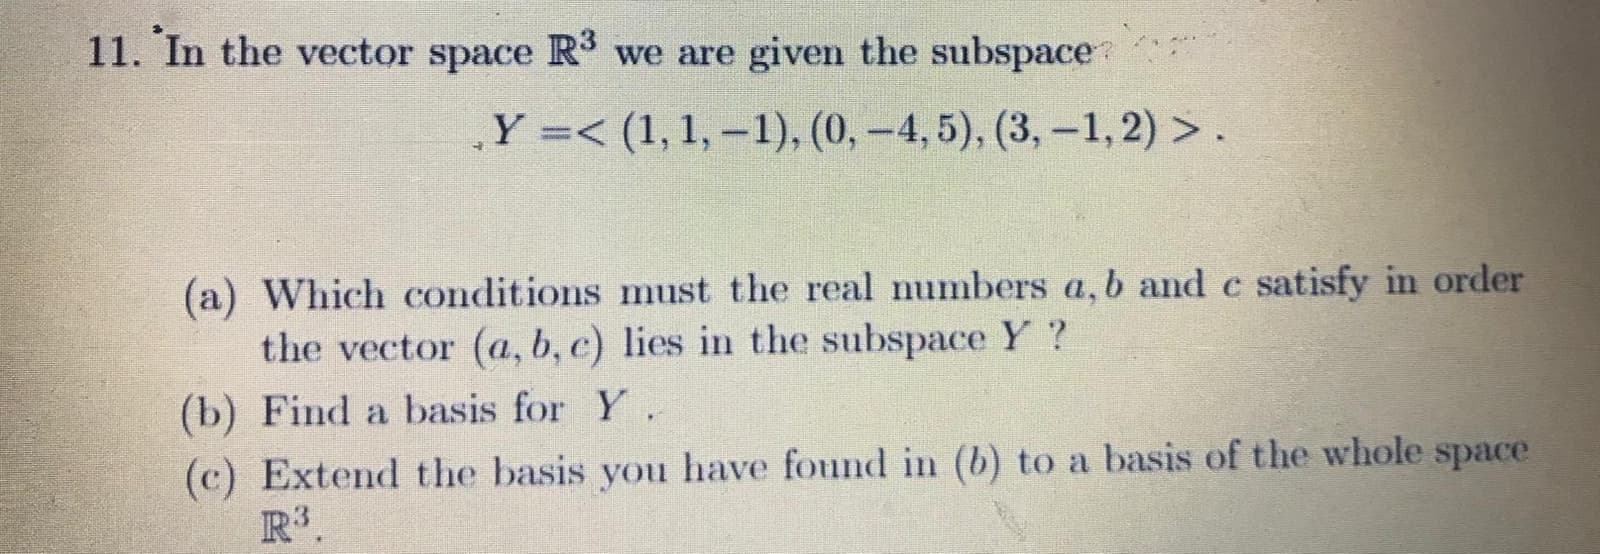 11. In the vector space R3 we are given the subspace
Y =< (1, 1, –1), (0,-4, 5), (3,-1, 2) > .
(a) Which conditions must the real numbers a, b and c satisfy in order
the vector (a, b, c) lies in the subspace Y ?
(b) Find a basis for Y.
(c) Extend the basis you have found in (b) to a basis of the whole space
R3.
